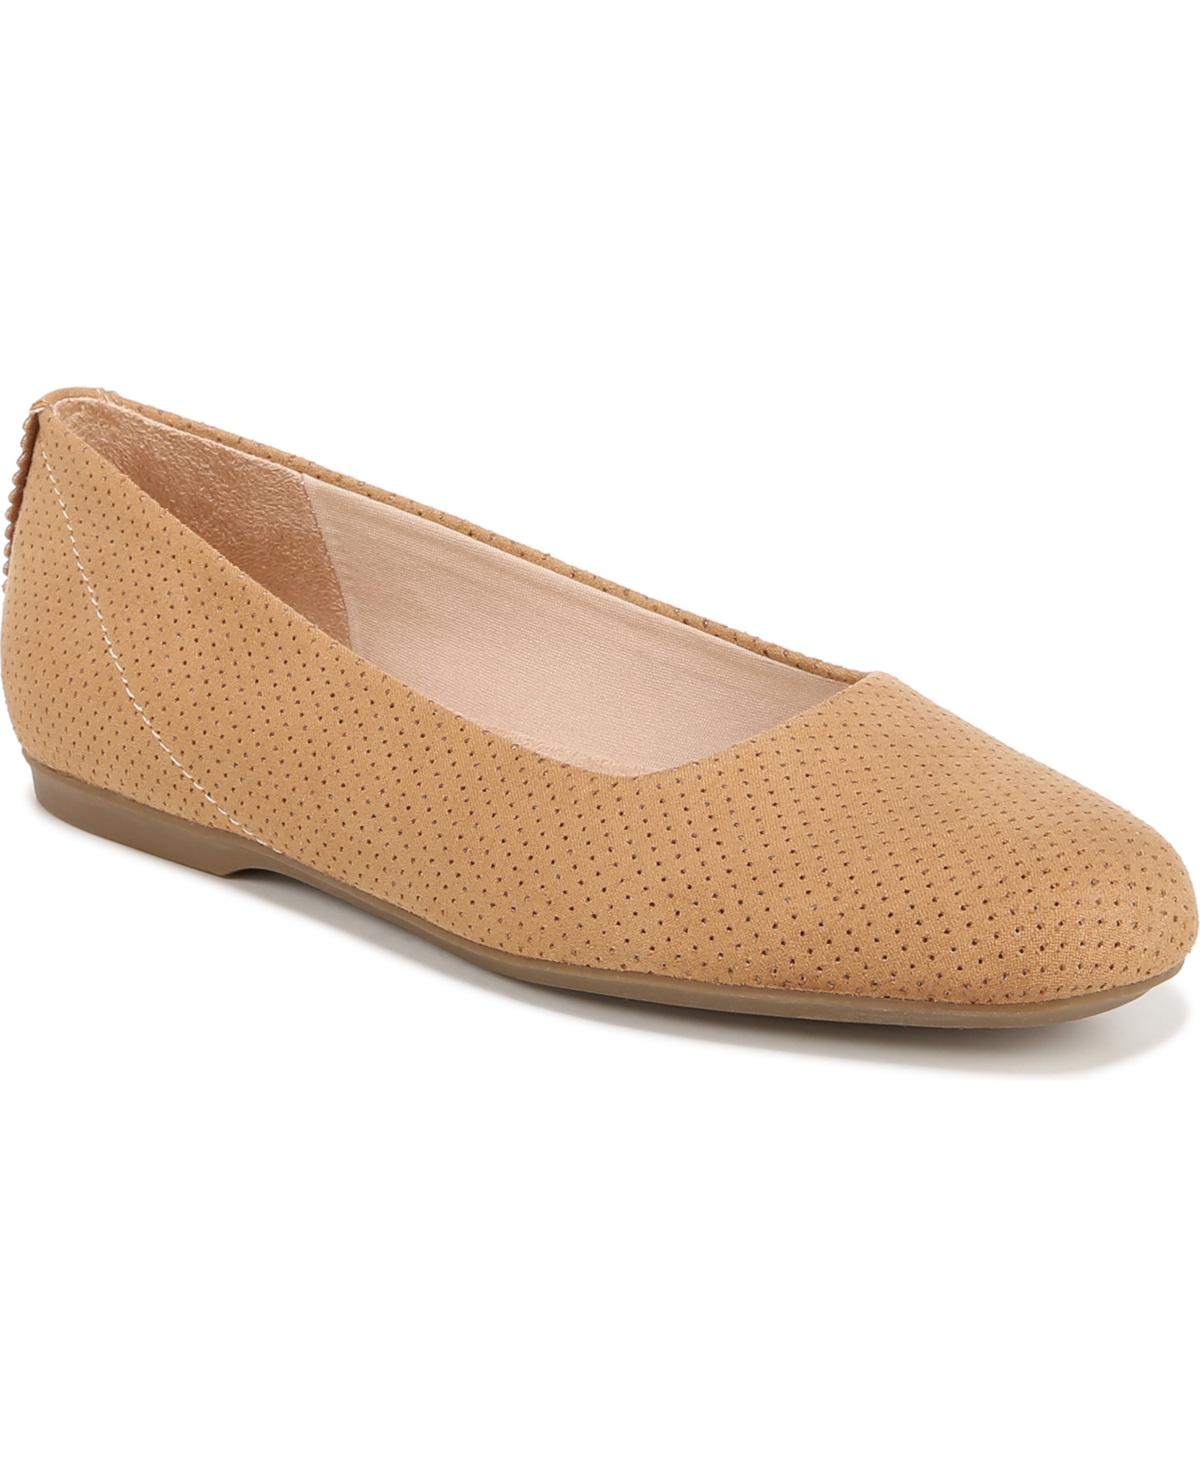 Women's Wexley Flats - Tan Perforated Microfiber